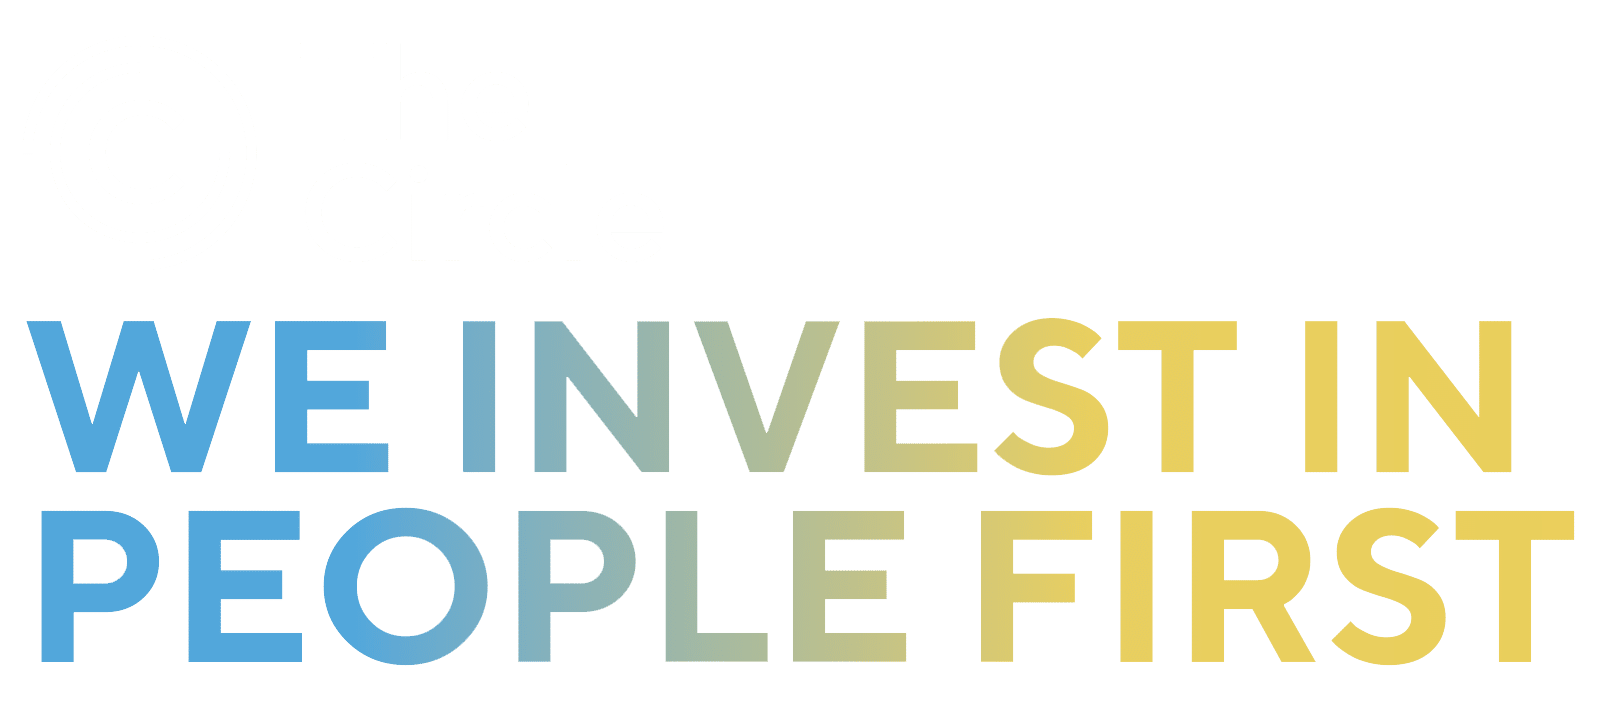 We Invest in People First